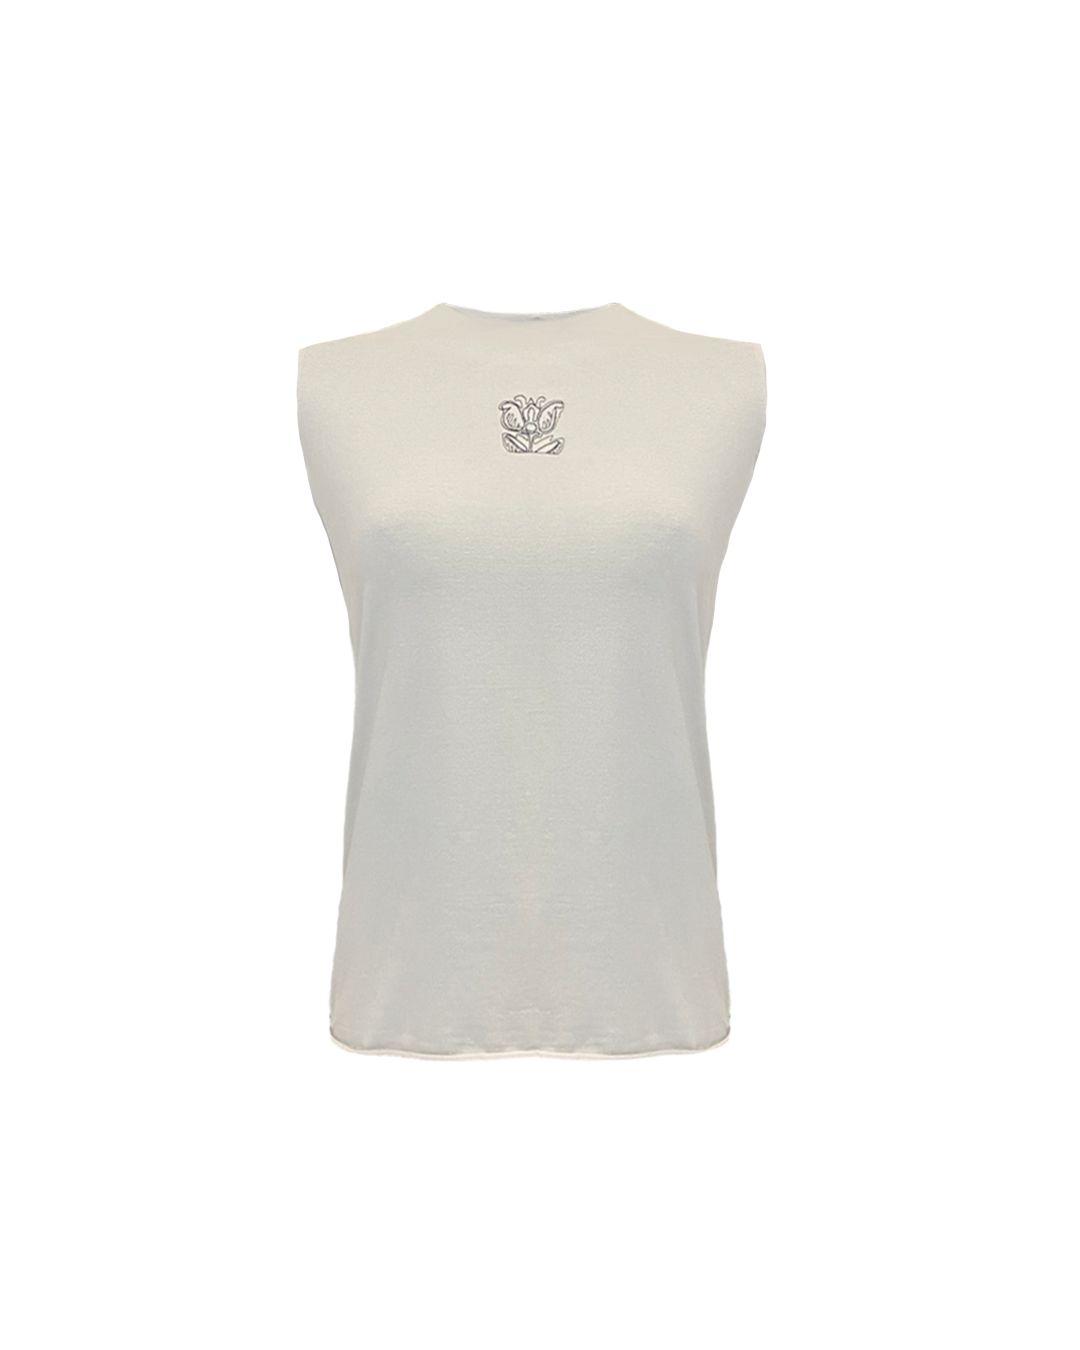 ORGANIC COTTON SLEEVELESS TOP WITH EMBROIDERY